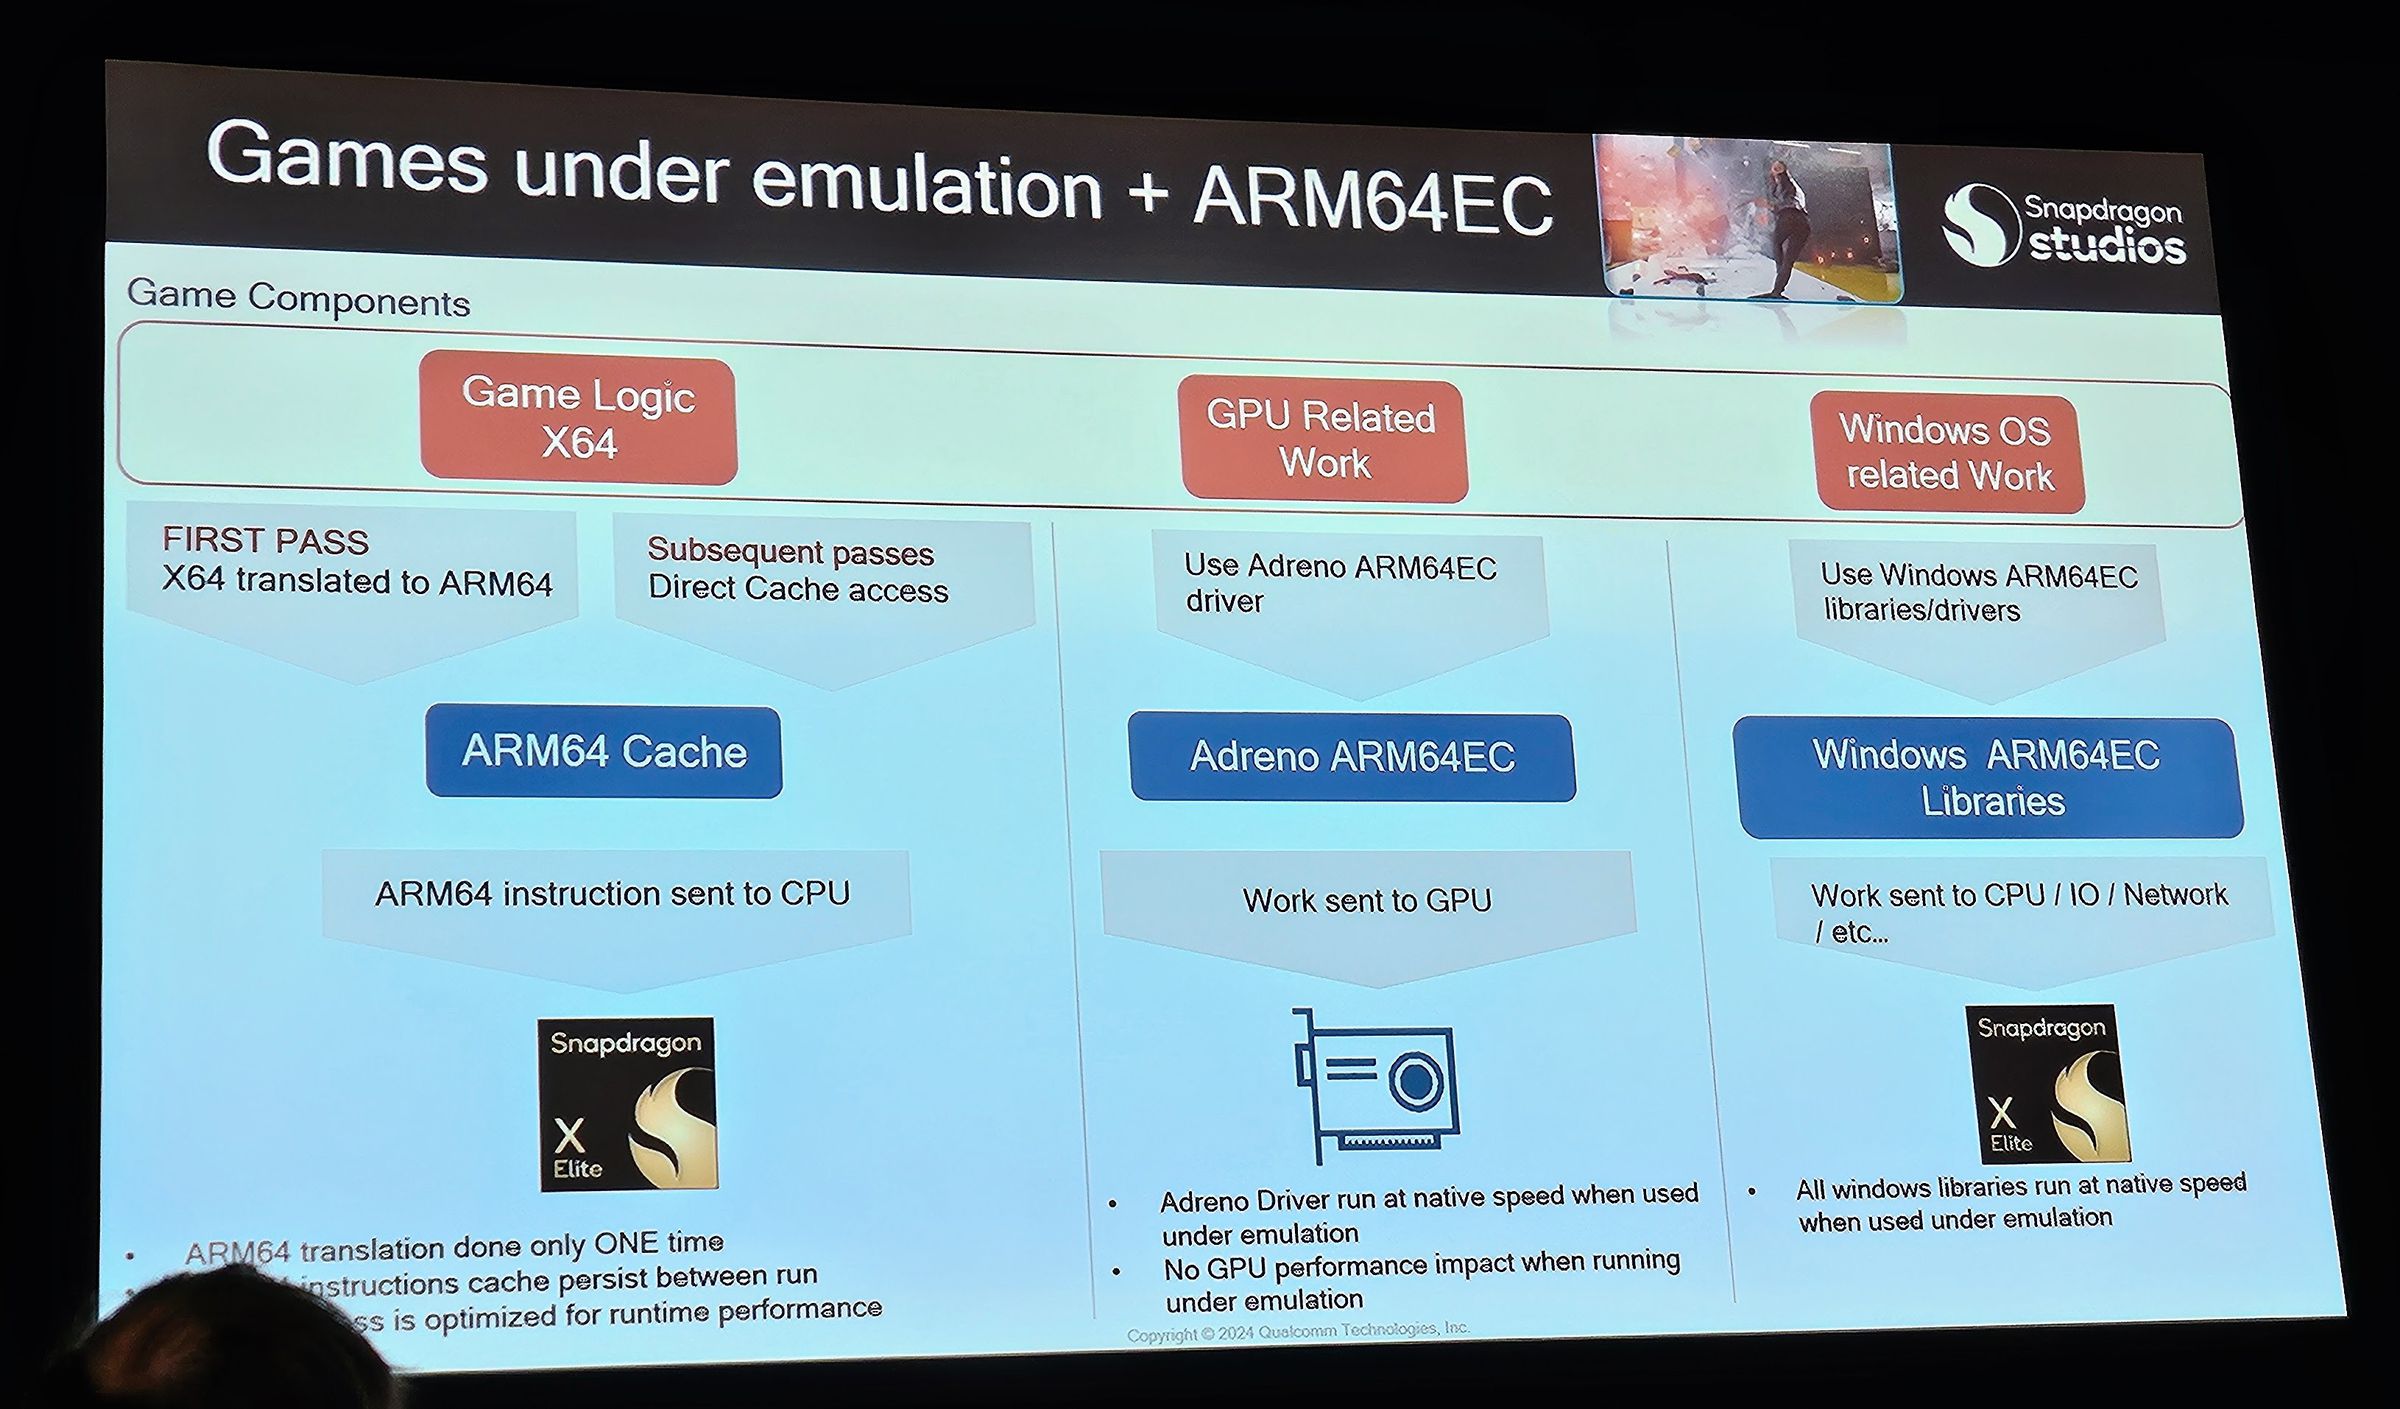 How ARM64EC is different.